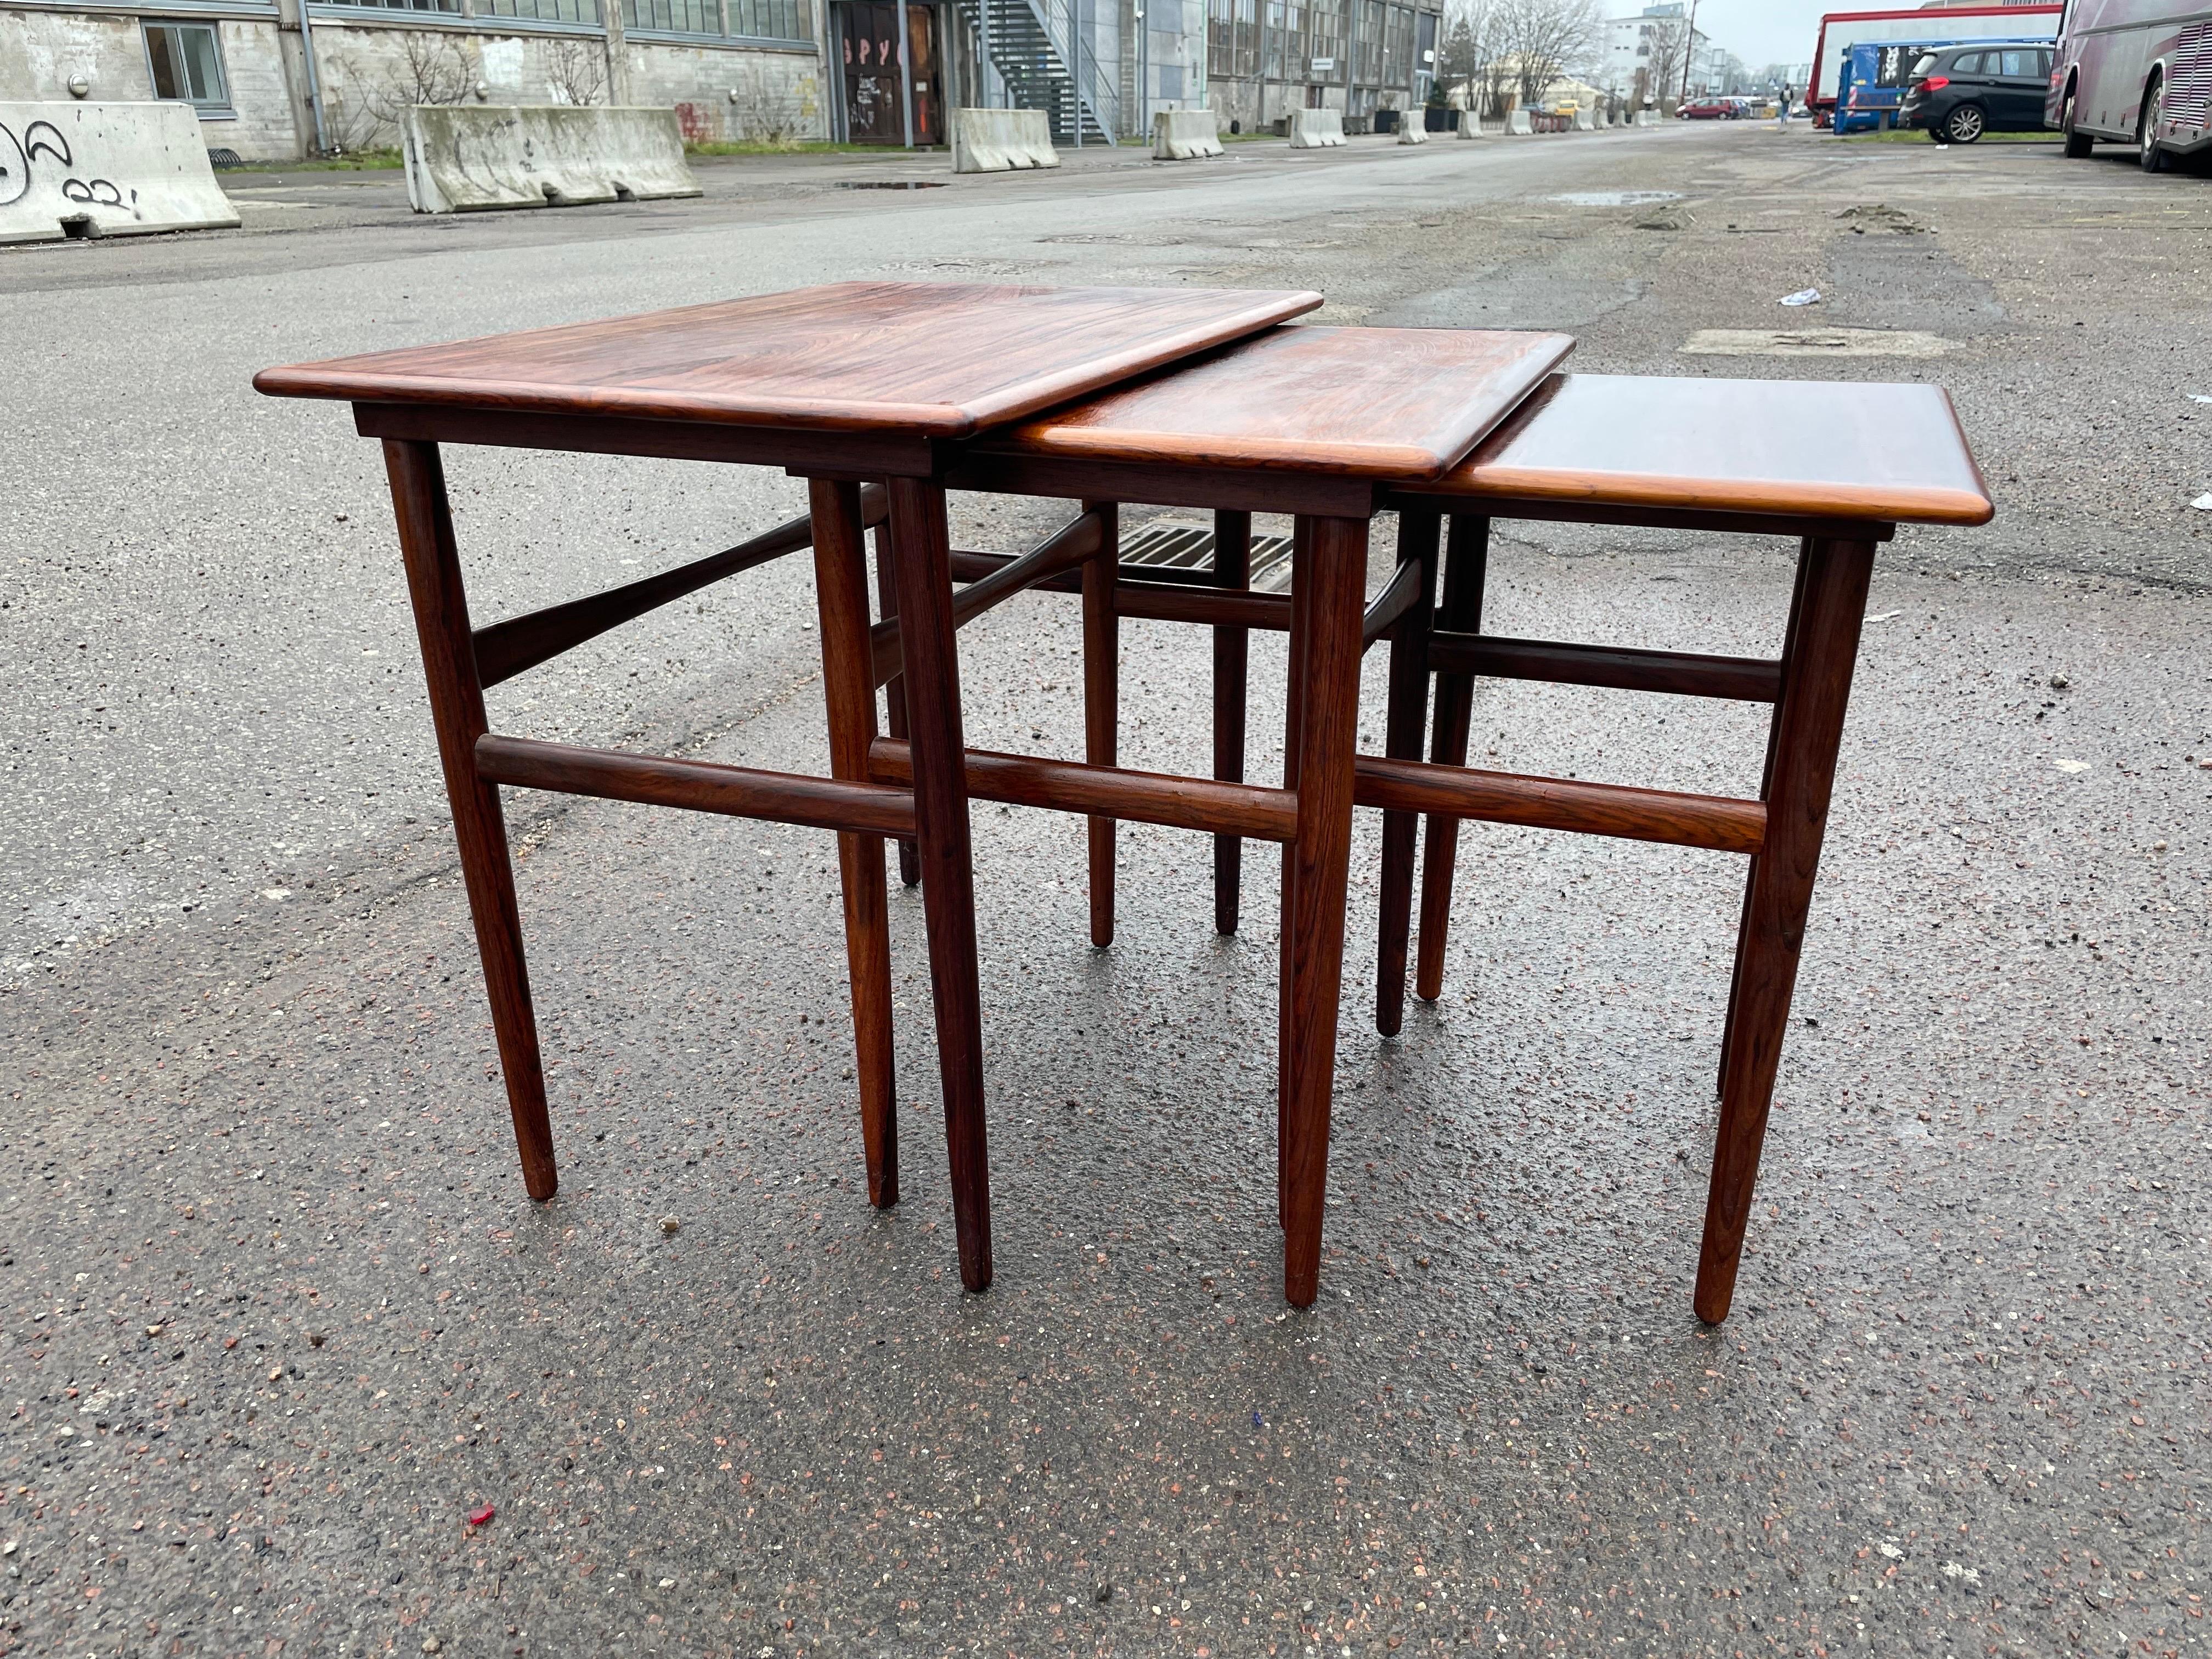 These Danish Mid-Century Modern nesting tables from the 1960s are the epitome of sleek, minimalistic design. The clean lines and functionality of the tables make them a perfect addition to any modern living space. The nesting feature allows for